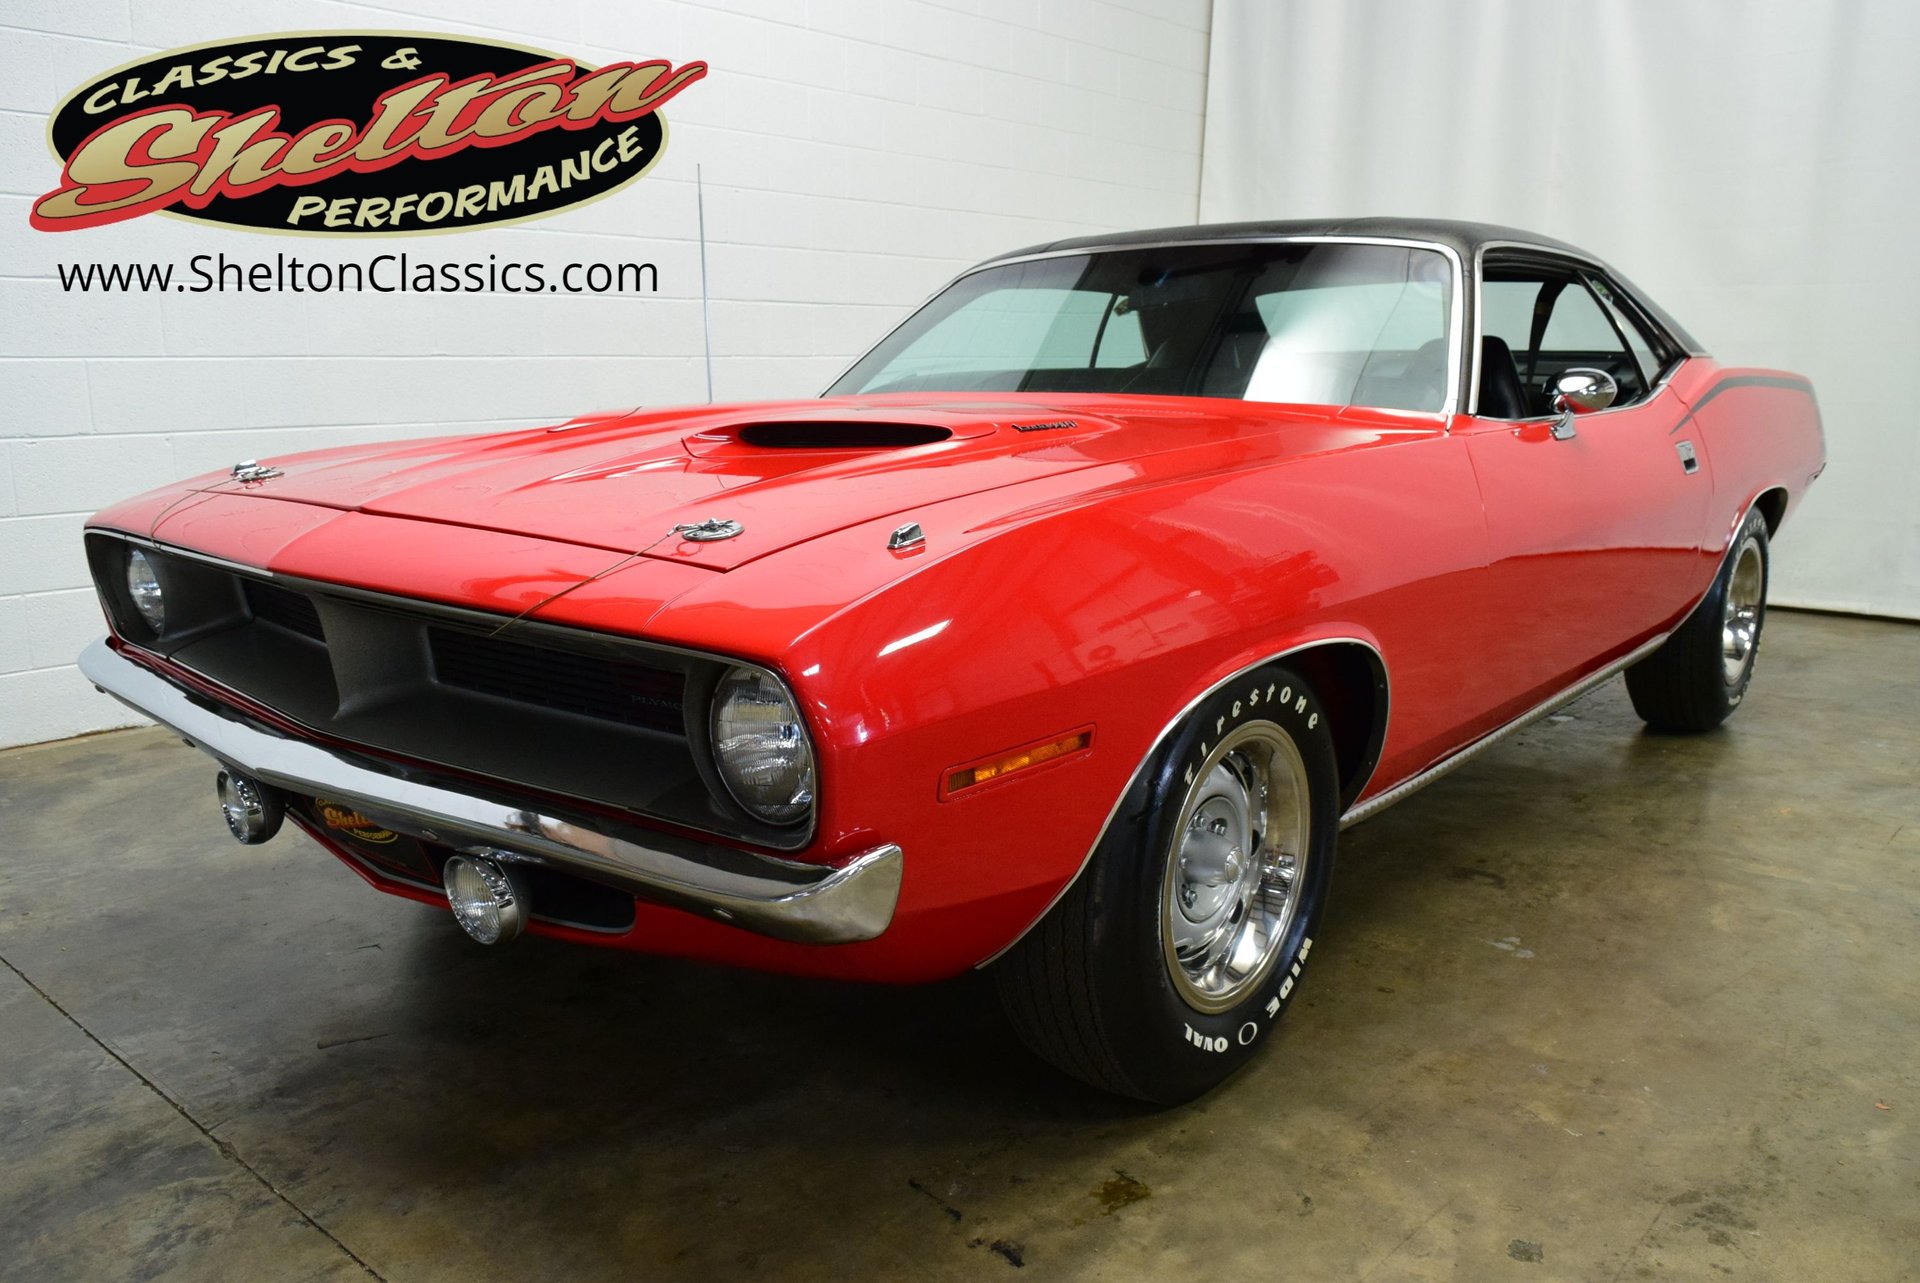 MUSCLE MACHINES '70 Plymouth Cuda 00-4 Real Riders FREE SHIPPING